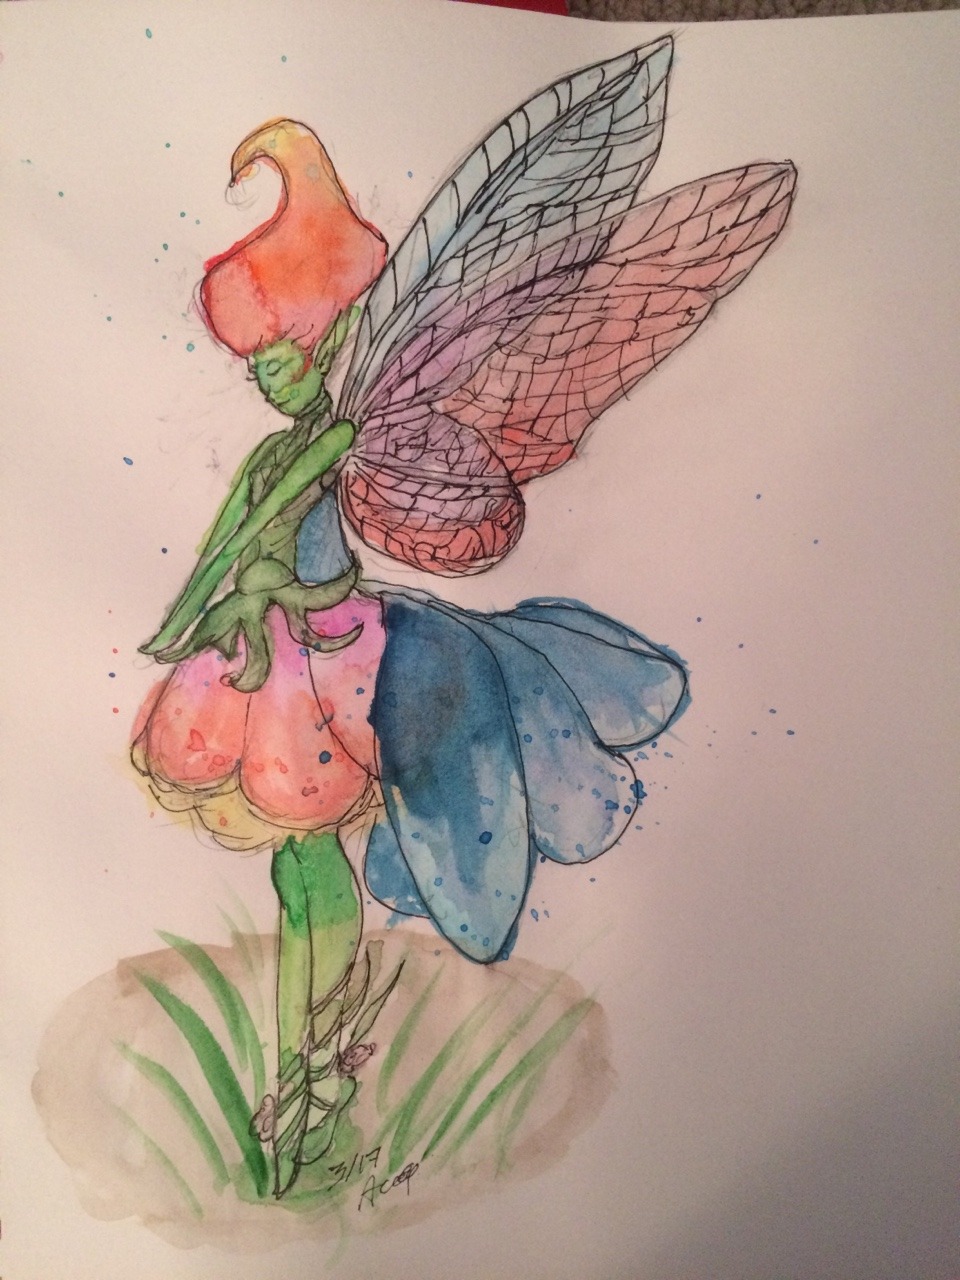 The Ameature Artist — My beautiful watercolor flower fairy